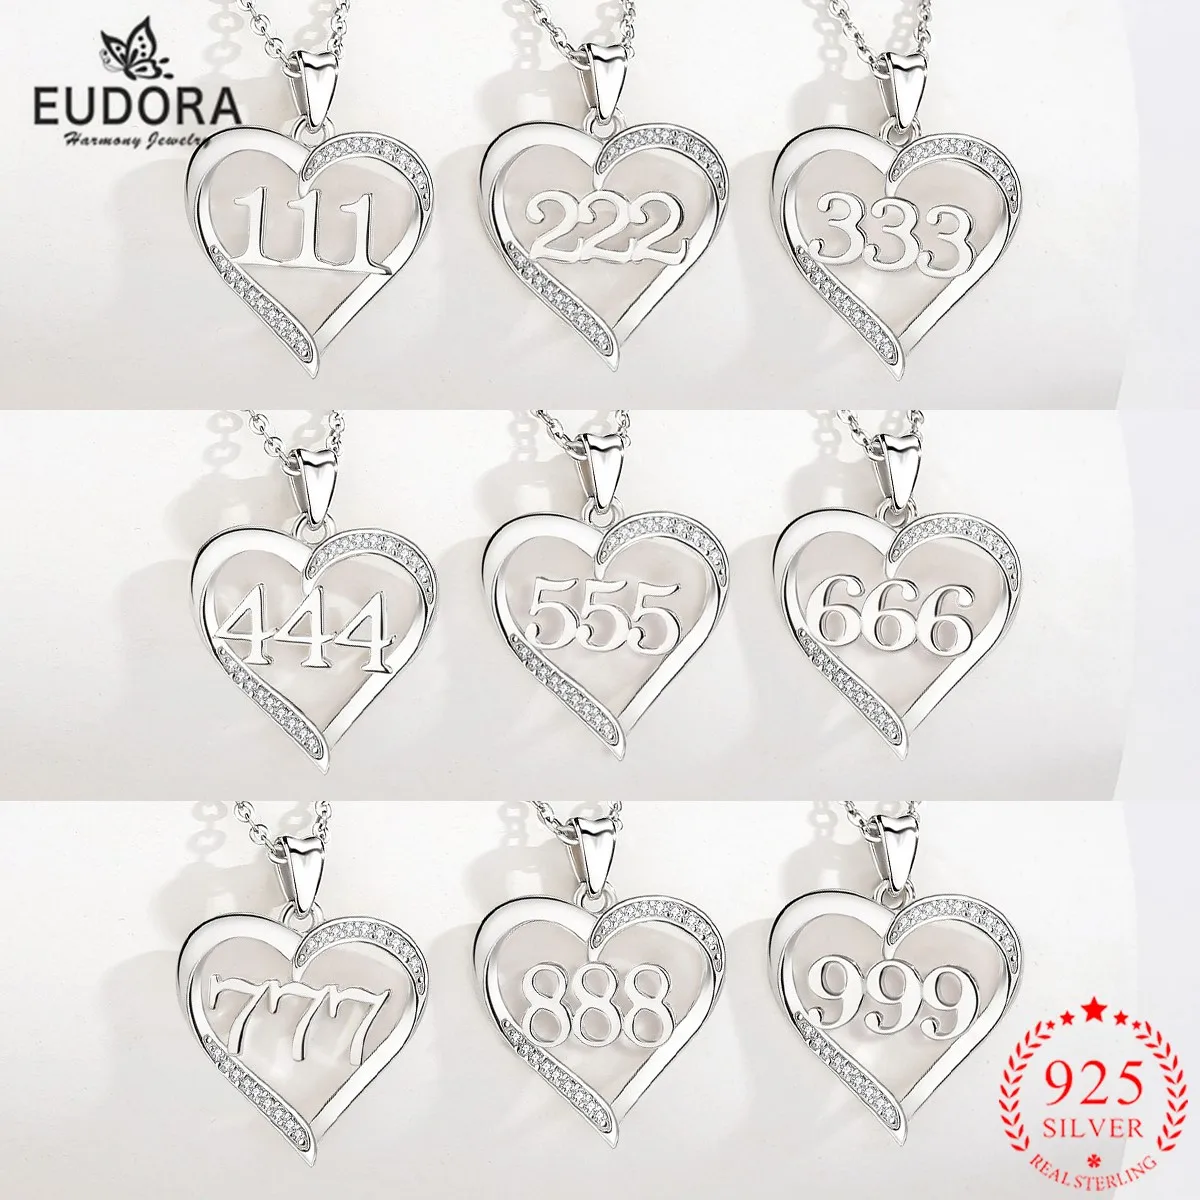 

Eudora 925 Sterling Silver Angel Number Necklace 111 222 333 444 777 888 999 666 Lucky Numbers Pendant Charms Jewelry for women